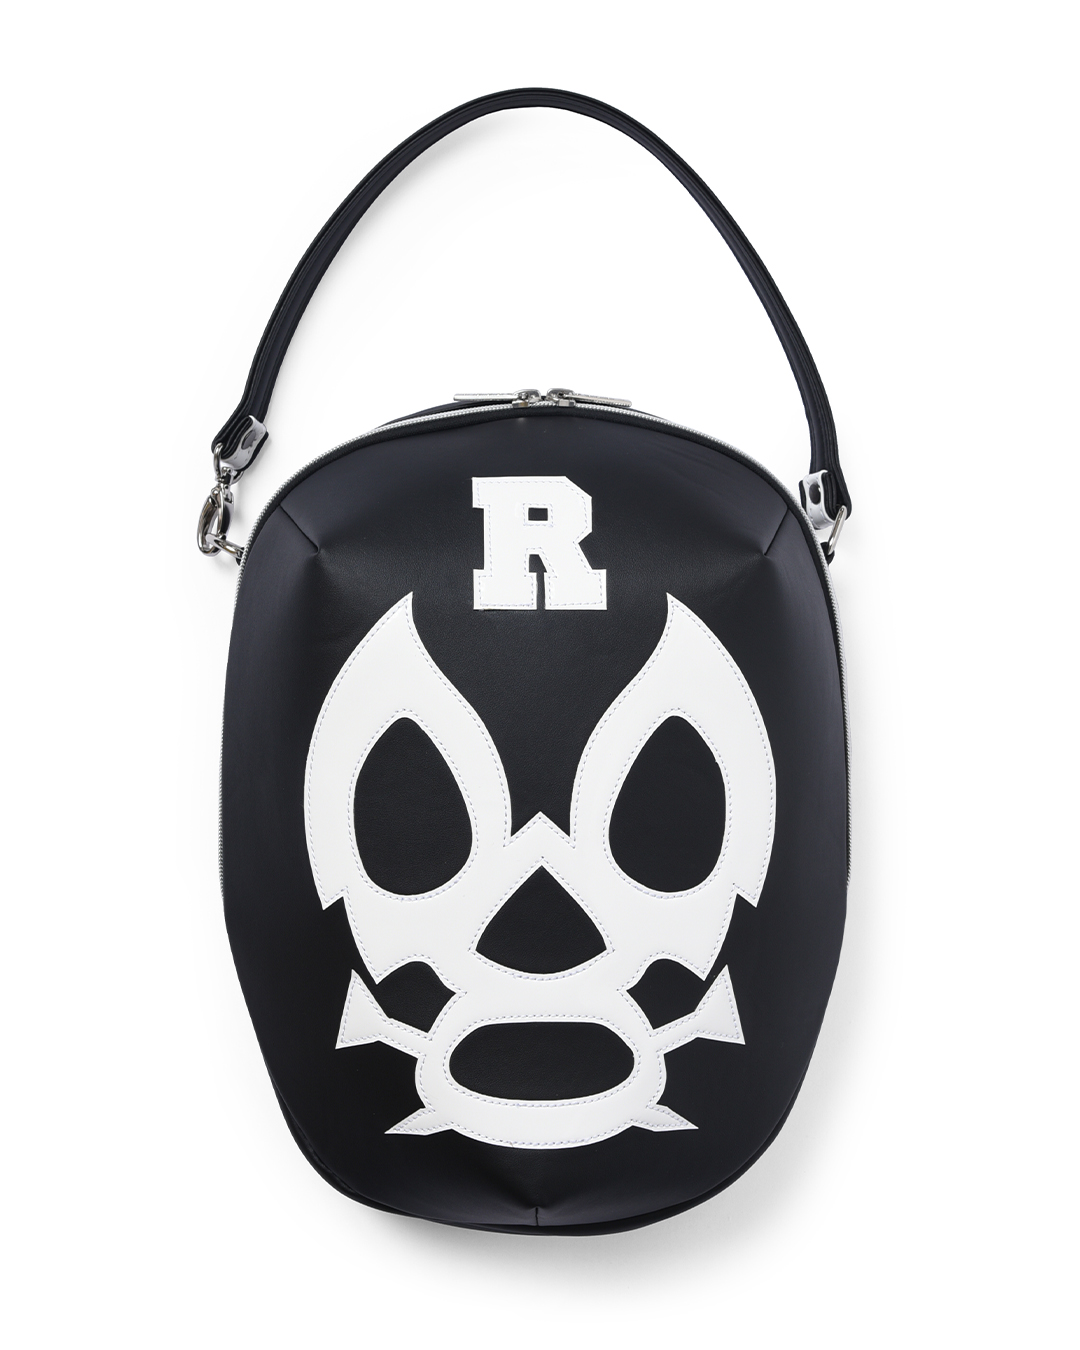 Russeluno Online Store / LUCHA SHOES CASE